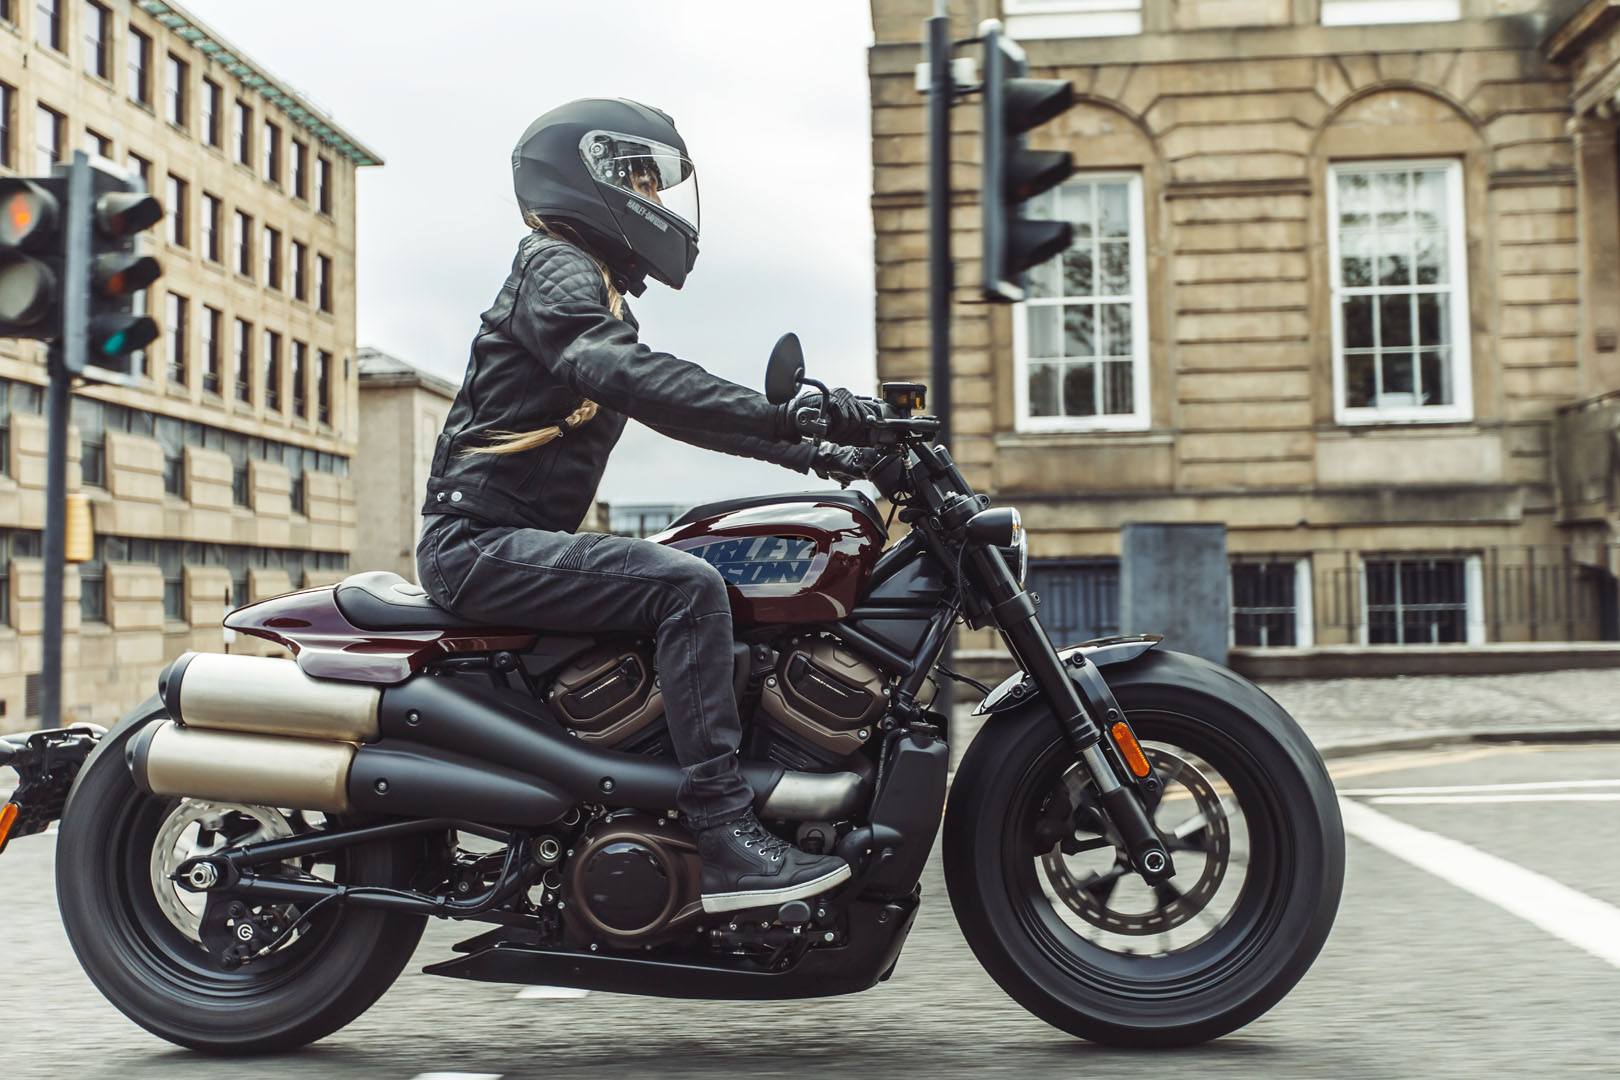 2021 Harley-Davidson Sportster® S in Knoxville, Tennessee - Photo 17